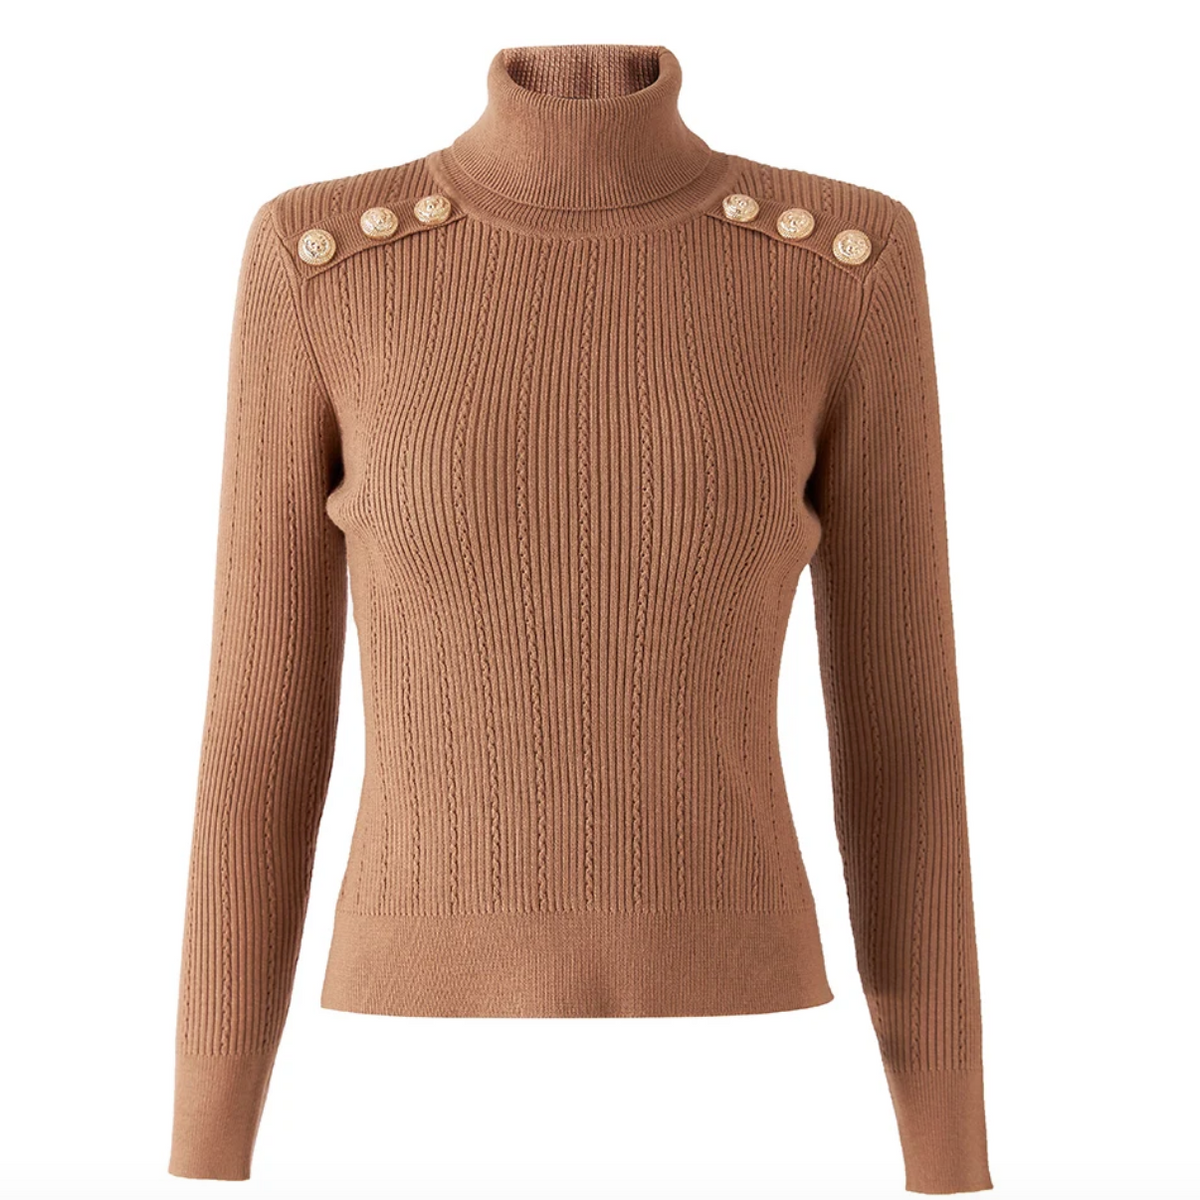 balmain inspired button detailed rollneck sweater is a sexy and sophisticated jumper made from soft ribbed knit, medium stretch fabric with beautiful button detailing. This turtleneck sweater is available in a series of colours and can be worn either casually or dressed up! camel